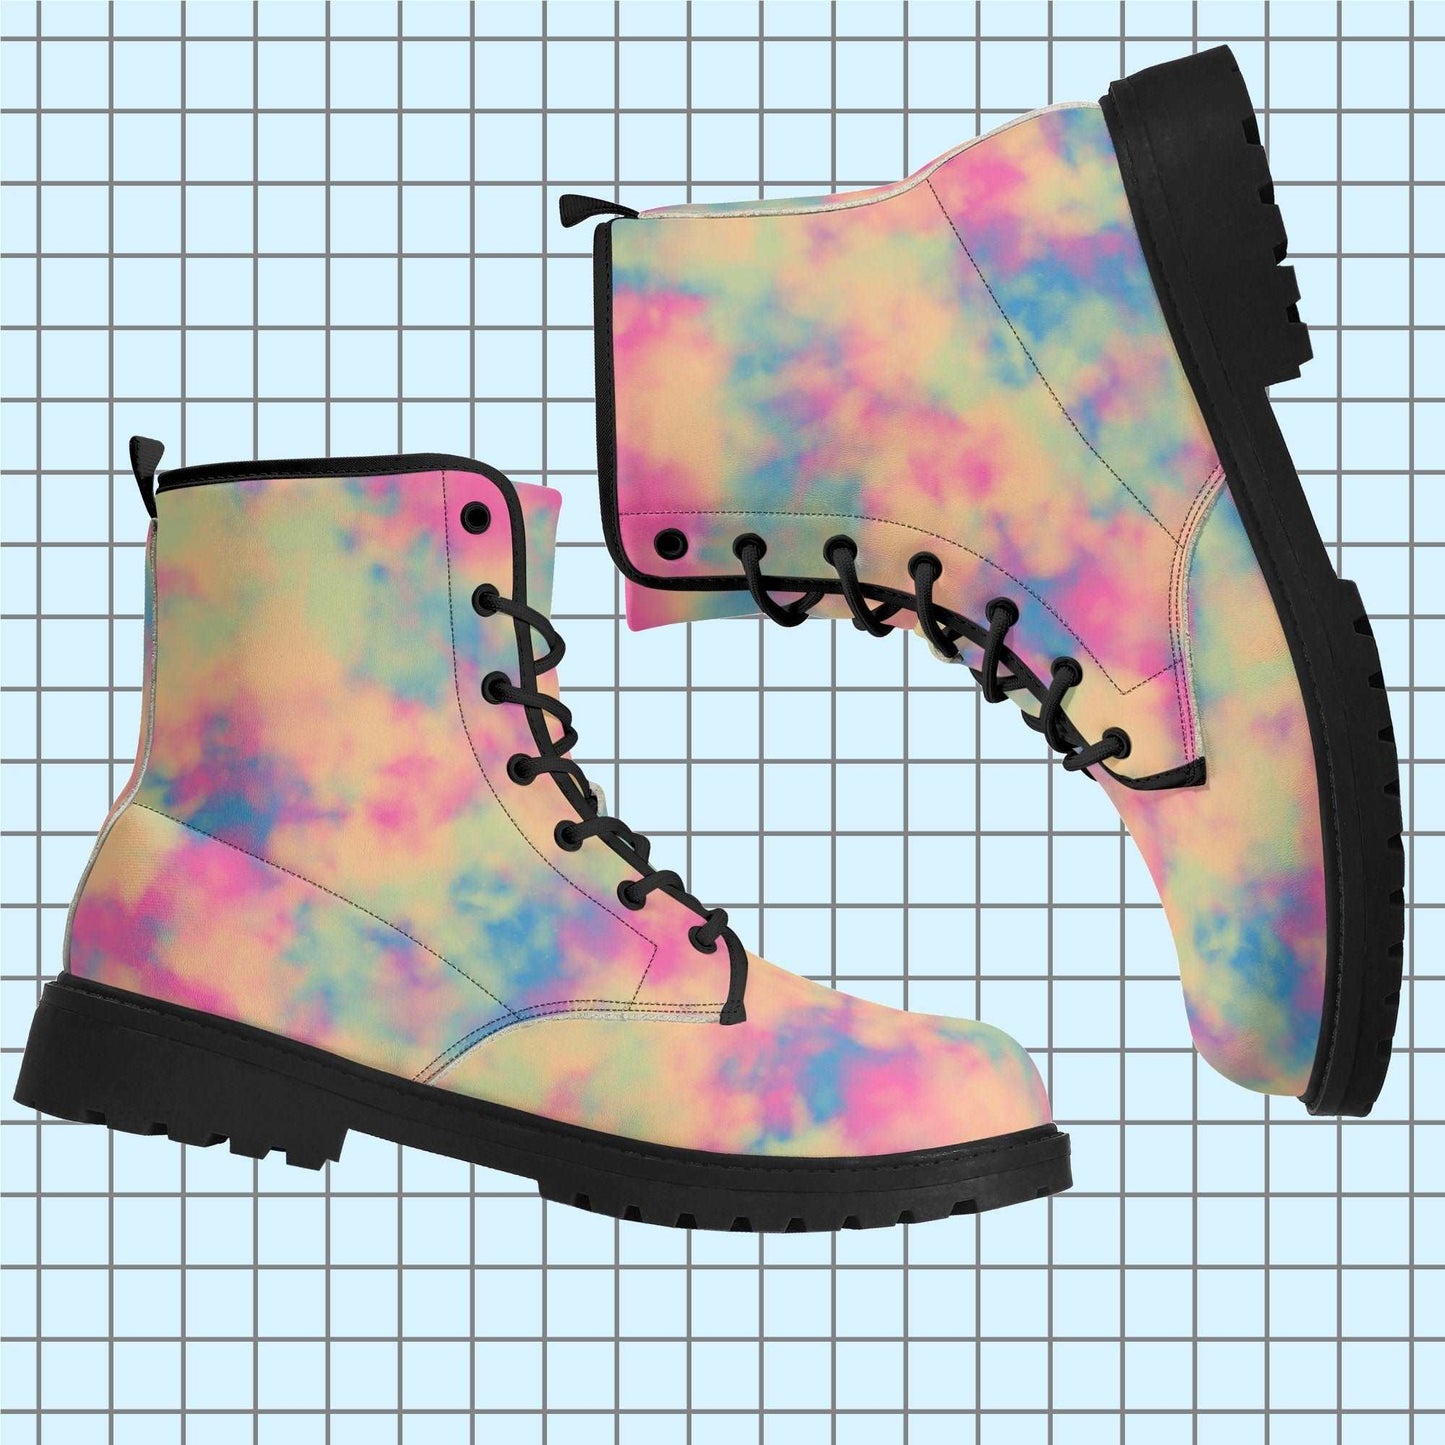 Colourful Tie-Dye Womens and Mens Sizes Leather Boots